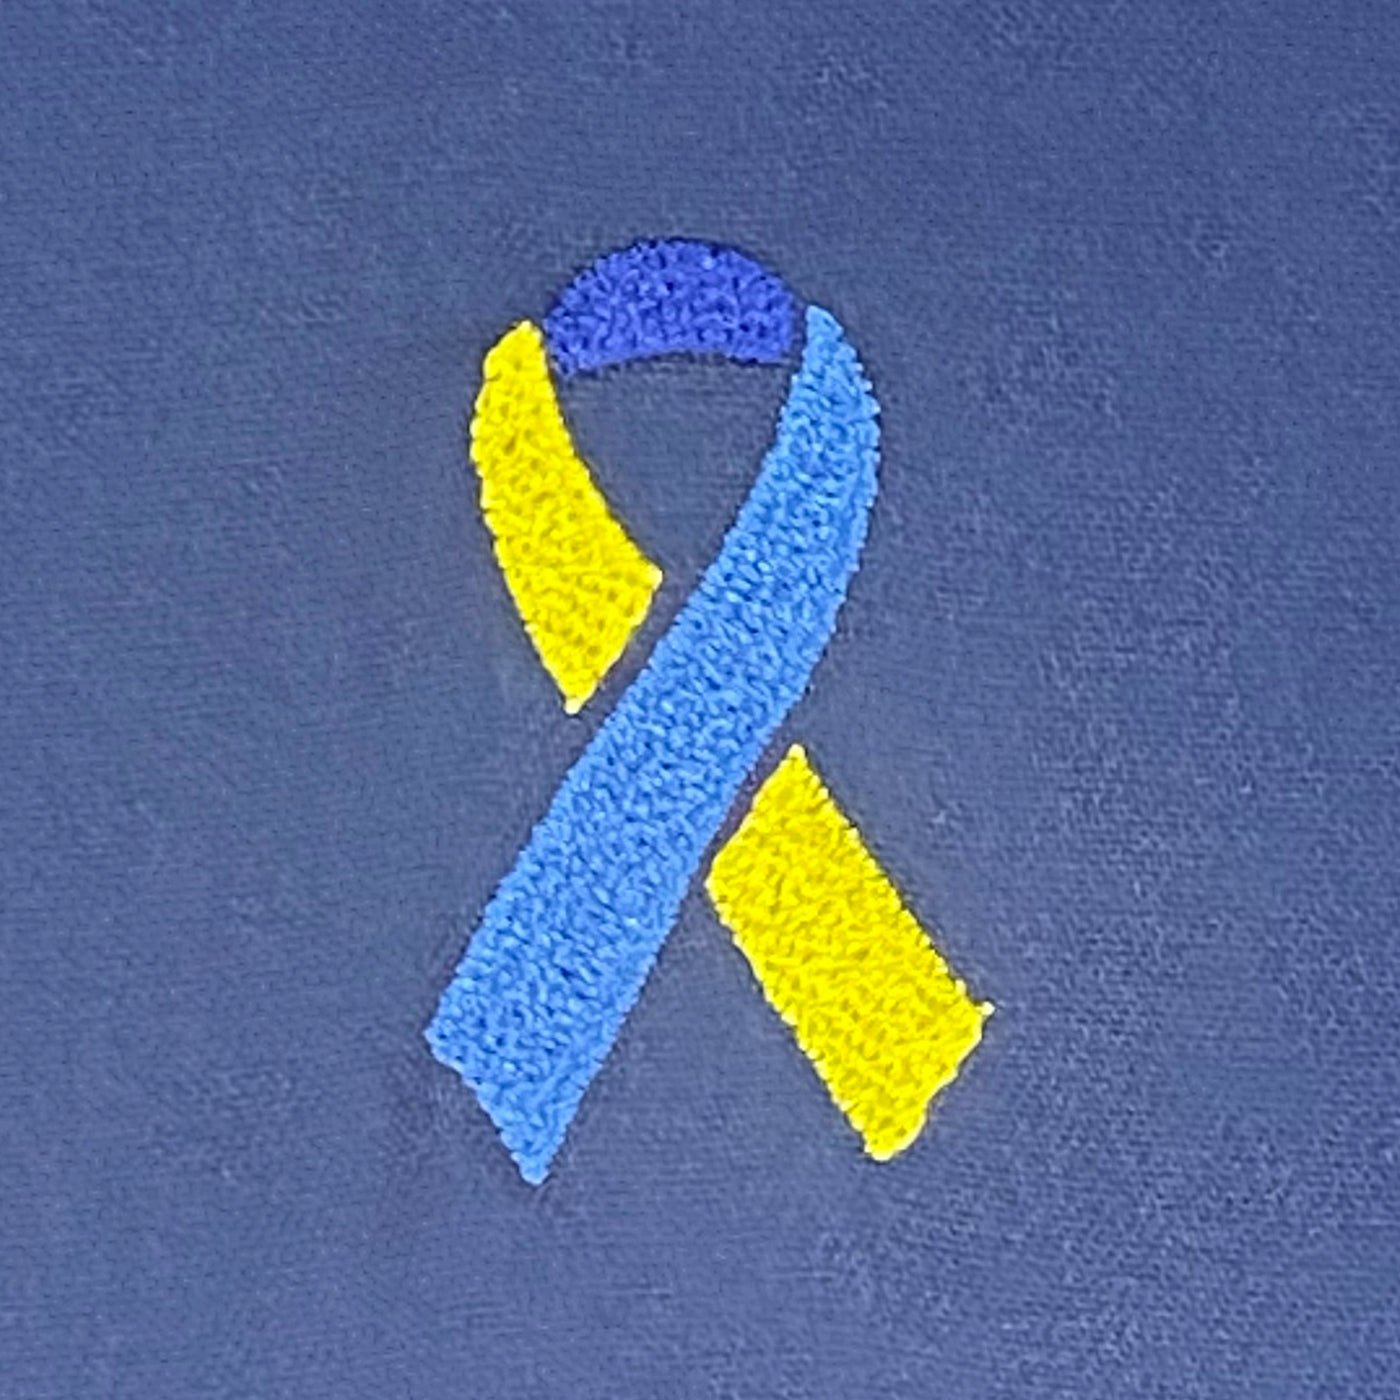 Embroidery Stock Logos - Down Syndrome Awareness